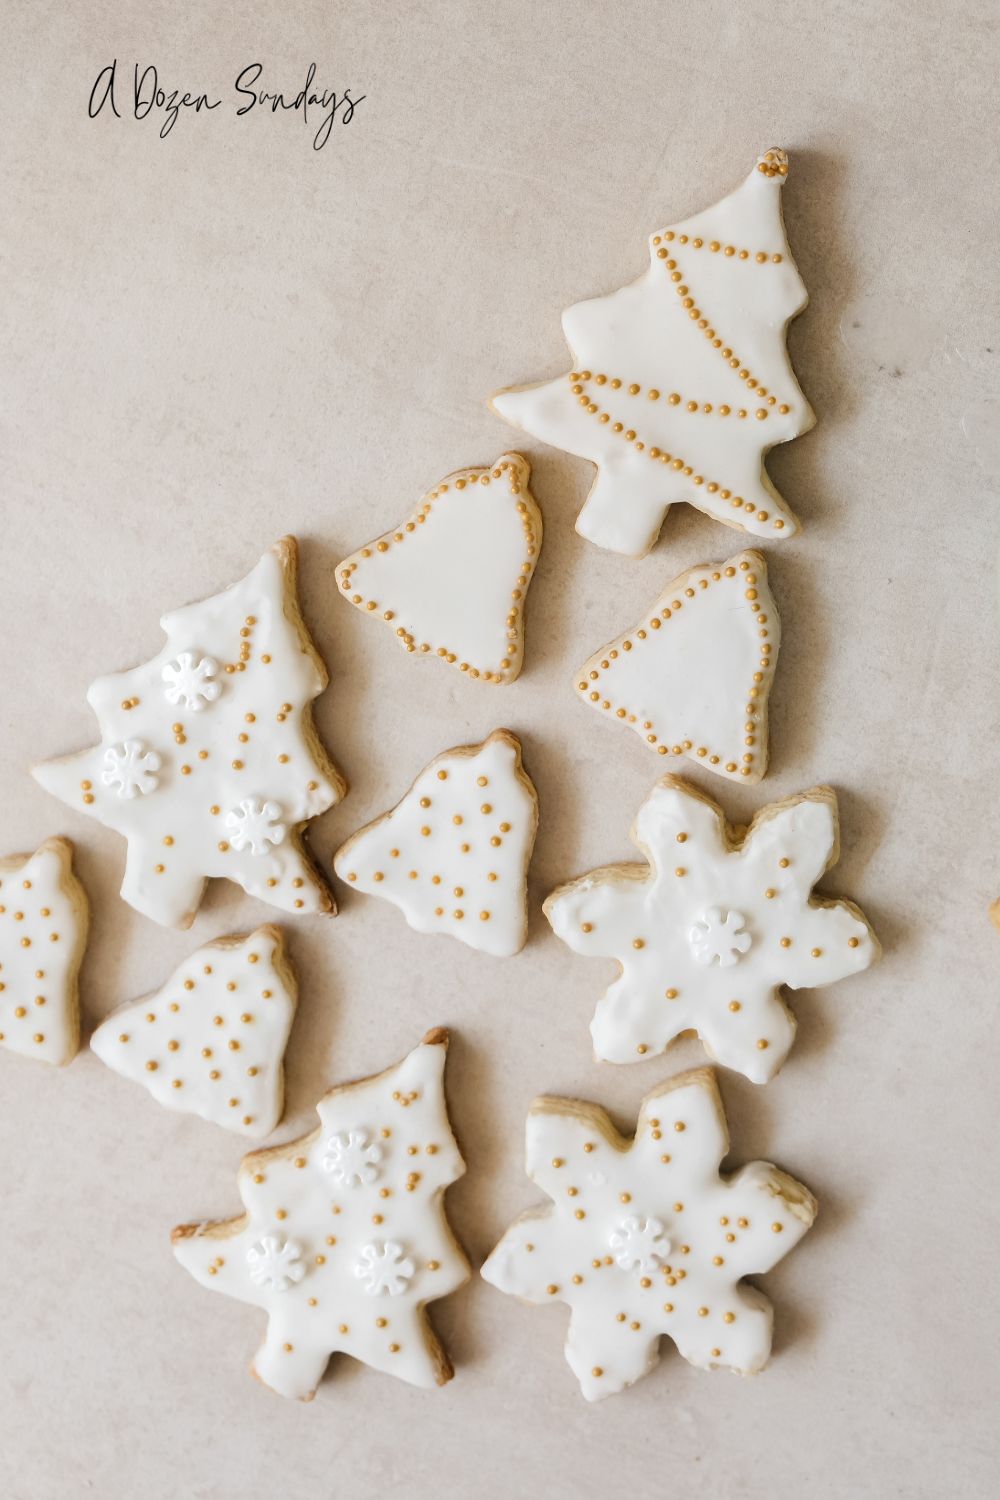 White and gold iced Christmas cookies laid out in the shape of a Christmas tree - A Dozen Sundays